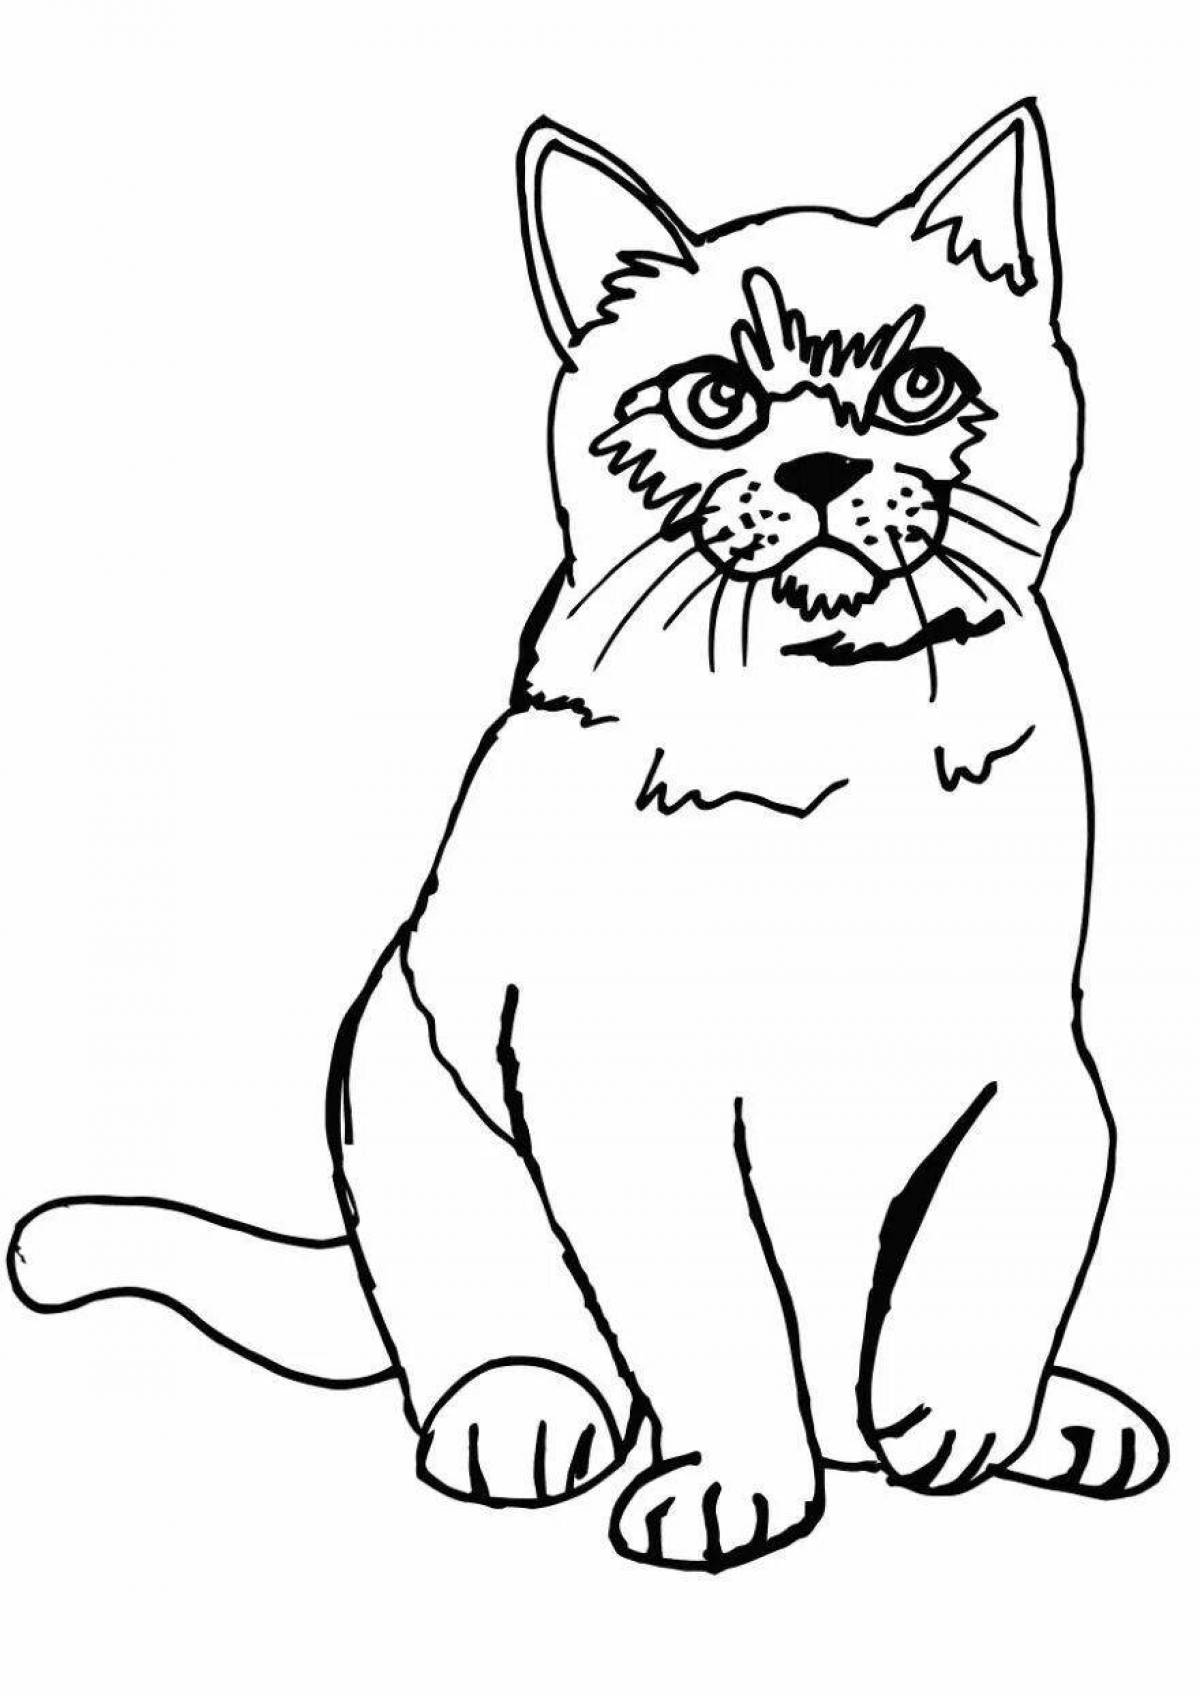 Fancy black and white cat coloring book